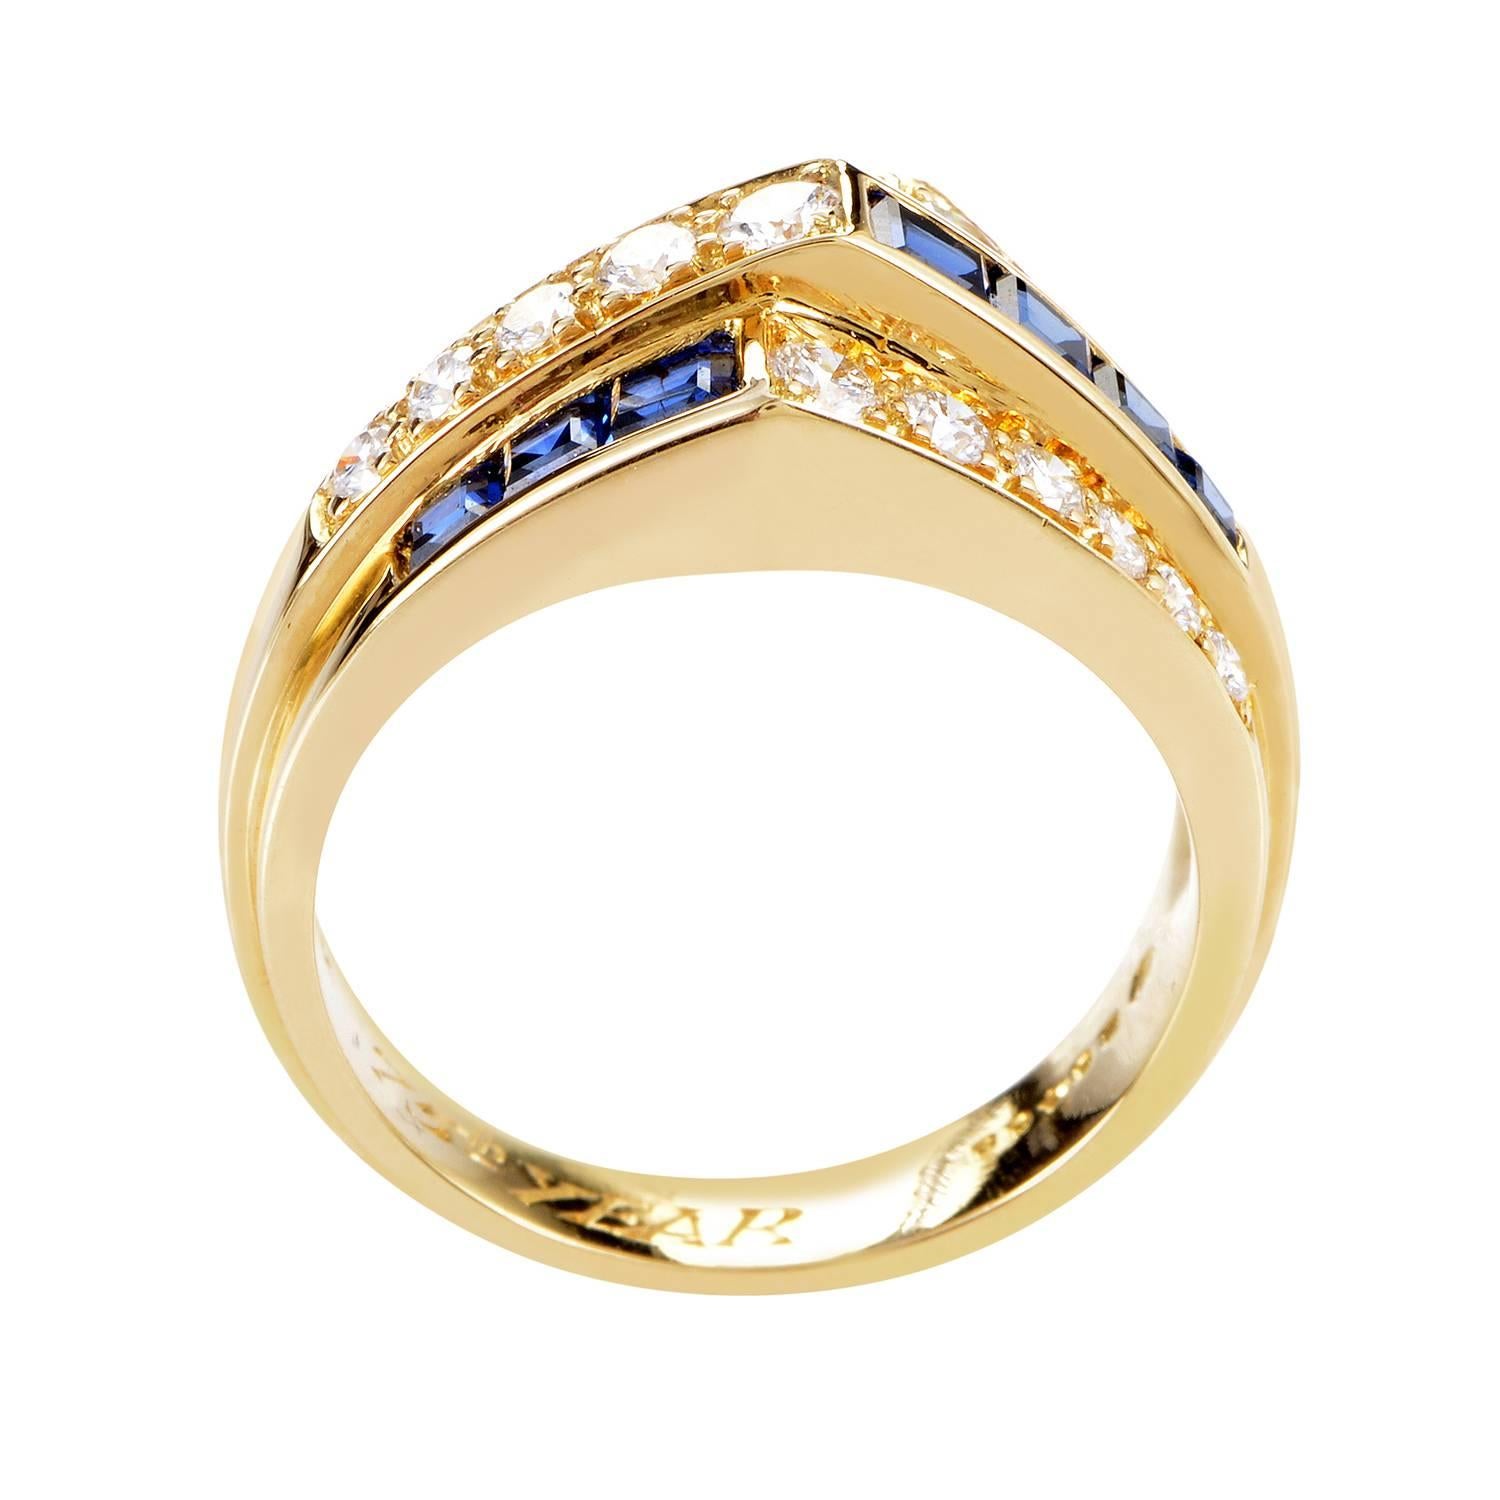 The tasteful contrast between captivating sapphires totaling 0.75ct and brightly glowing diamonds weighing in total approximately 0.65ct graces this 18K yellow gold ring from Oscar Heyman with eye-catching allure and pleasant appeal. <br/> Ring Top